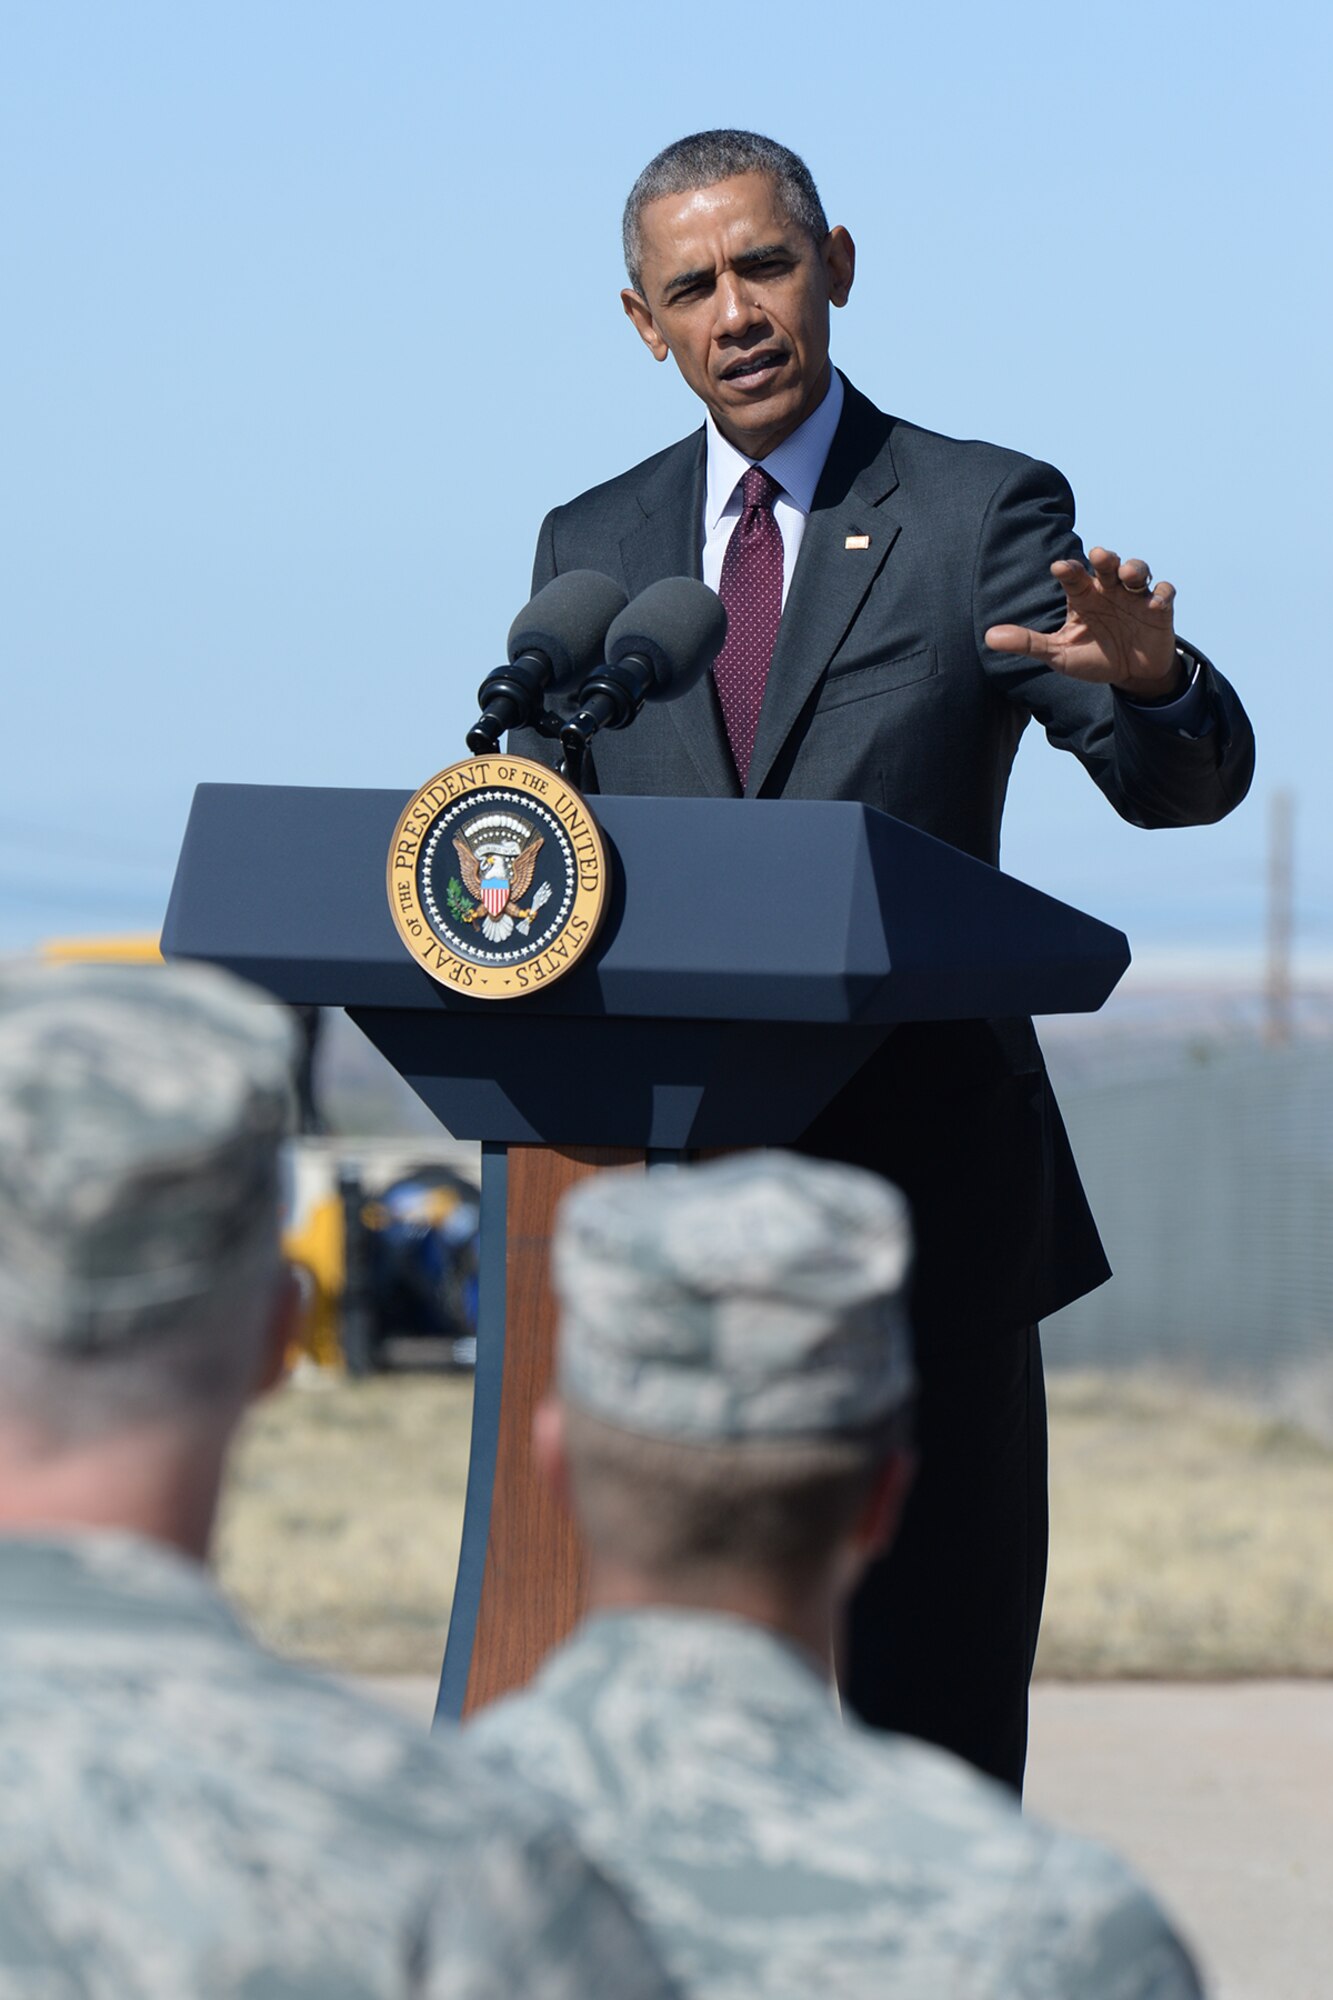 President Barack Obama speaks to a group of Utah elected officials, base leadership, and news media April 3 at Hill AFB to announce Solar Ready Vets, a program that seeks to train veterans for jobs in solar energy. (U.S. Air Force photo by R. Nial Bradshaw)